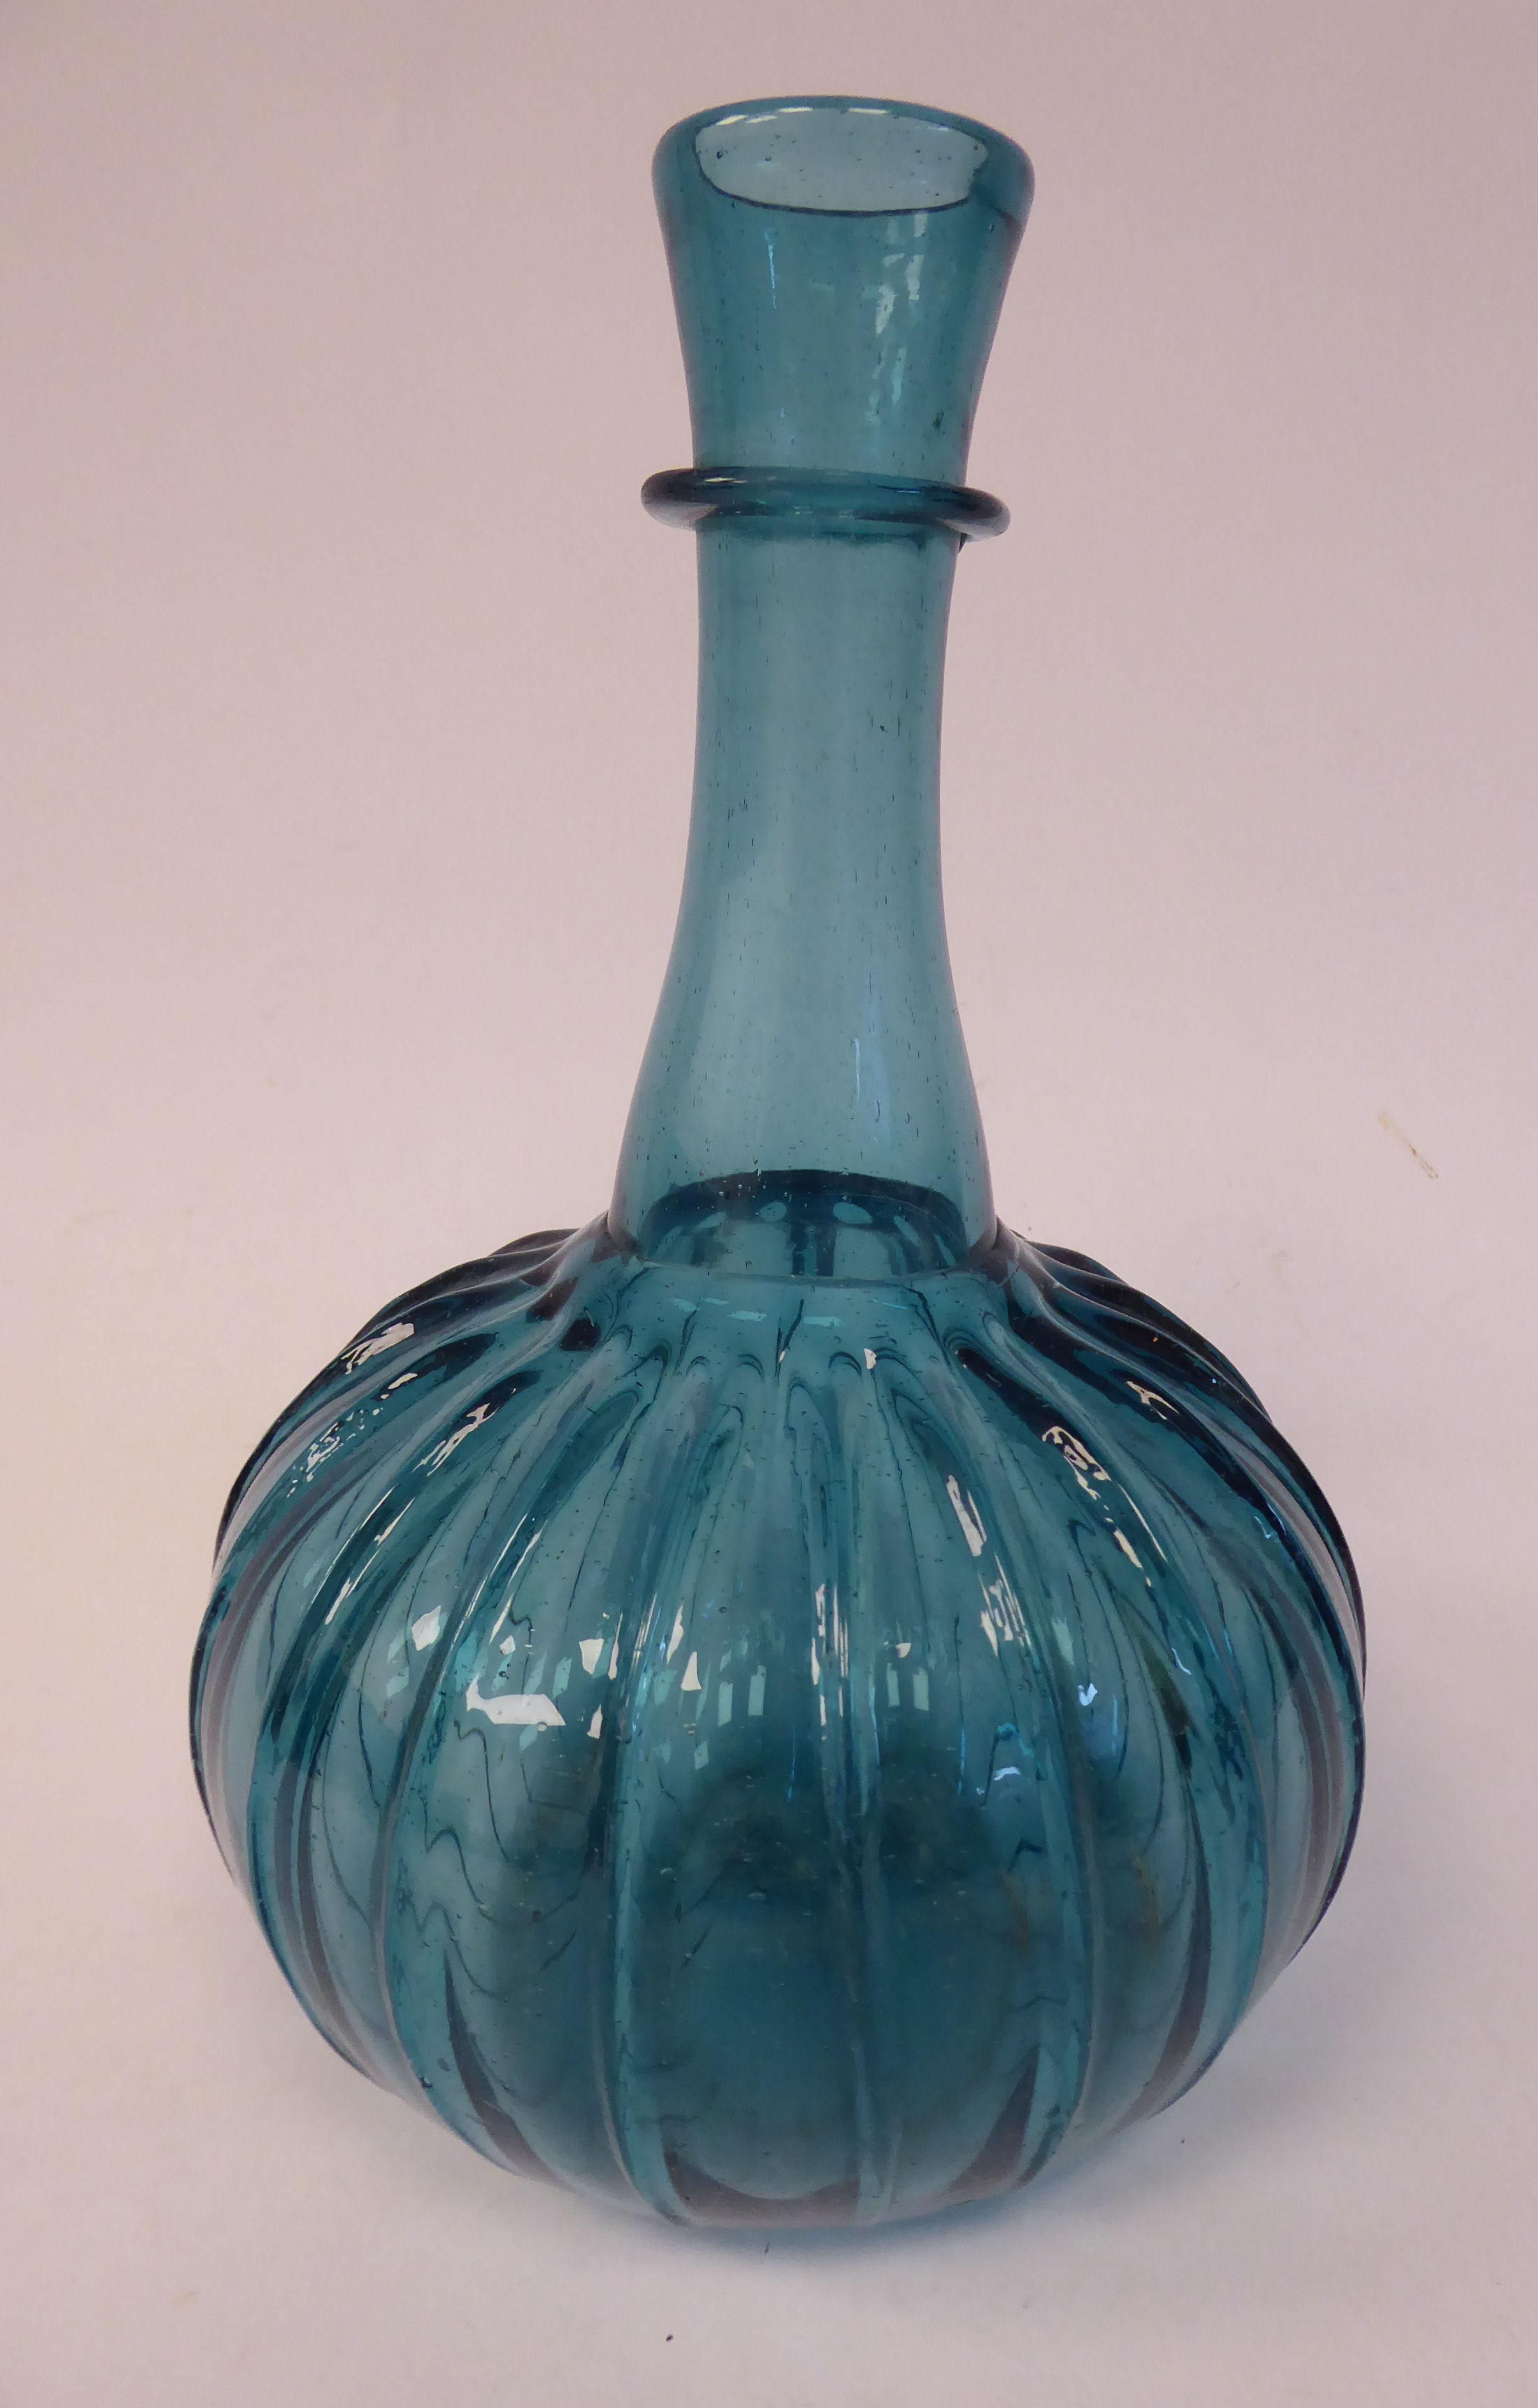 A 17thC Dutch semi-opaque turquoise glass bulbous and wide fluted bottle vase with a long, - Image 2 of 10